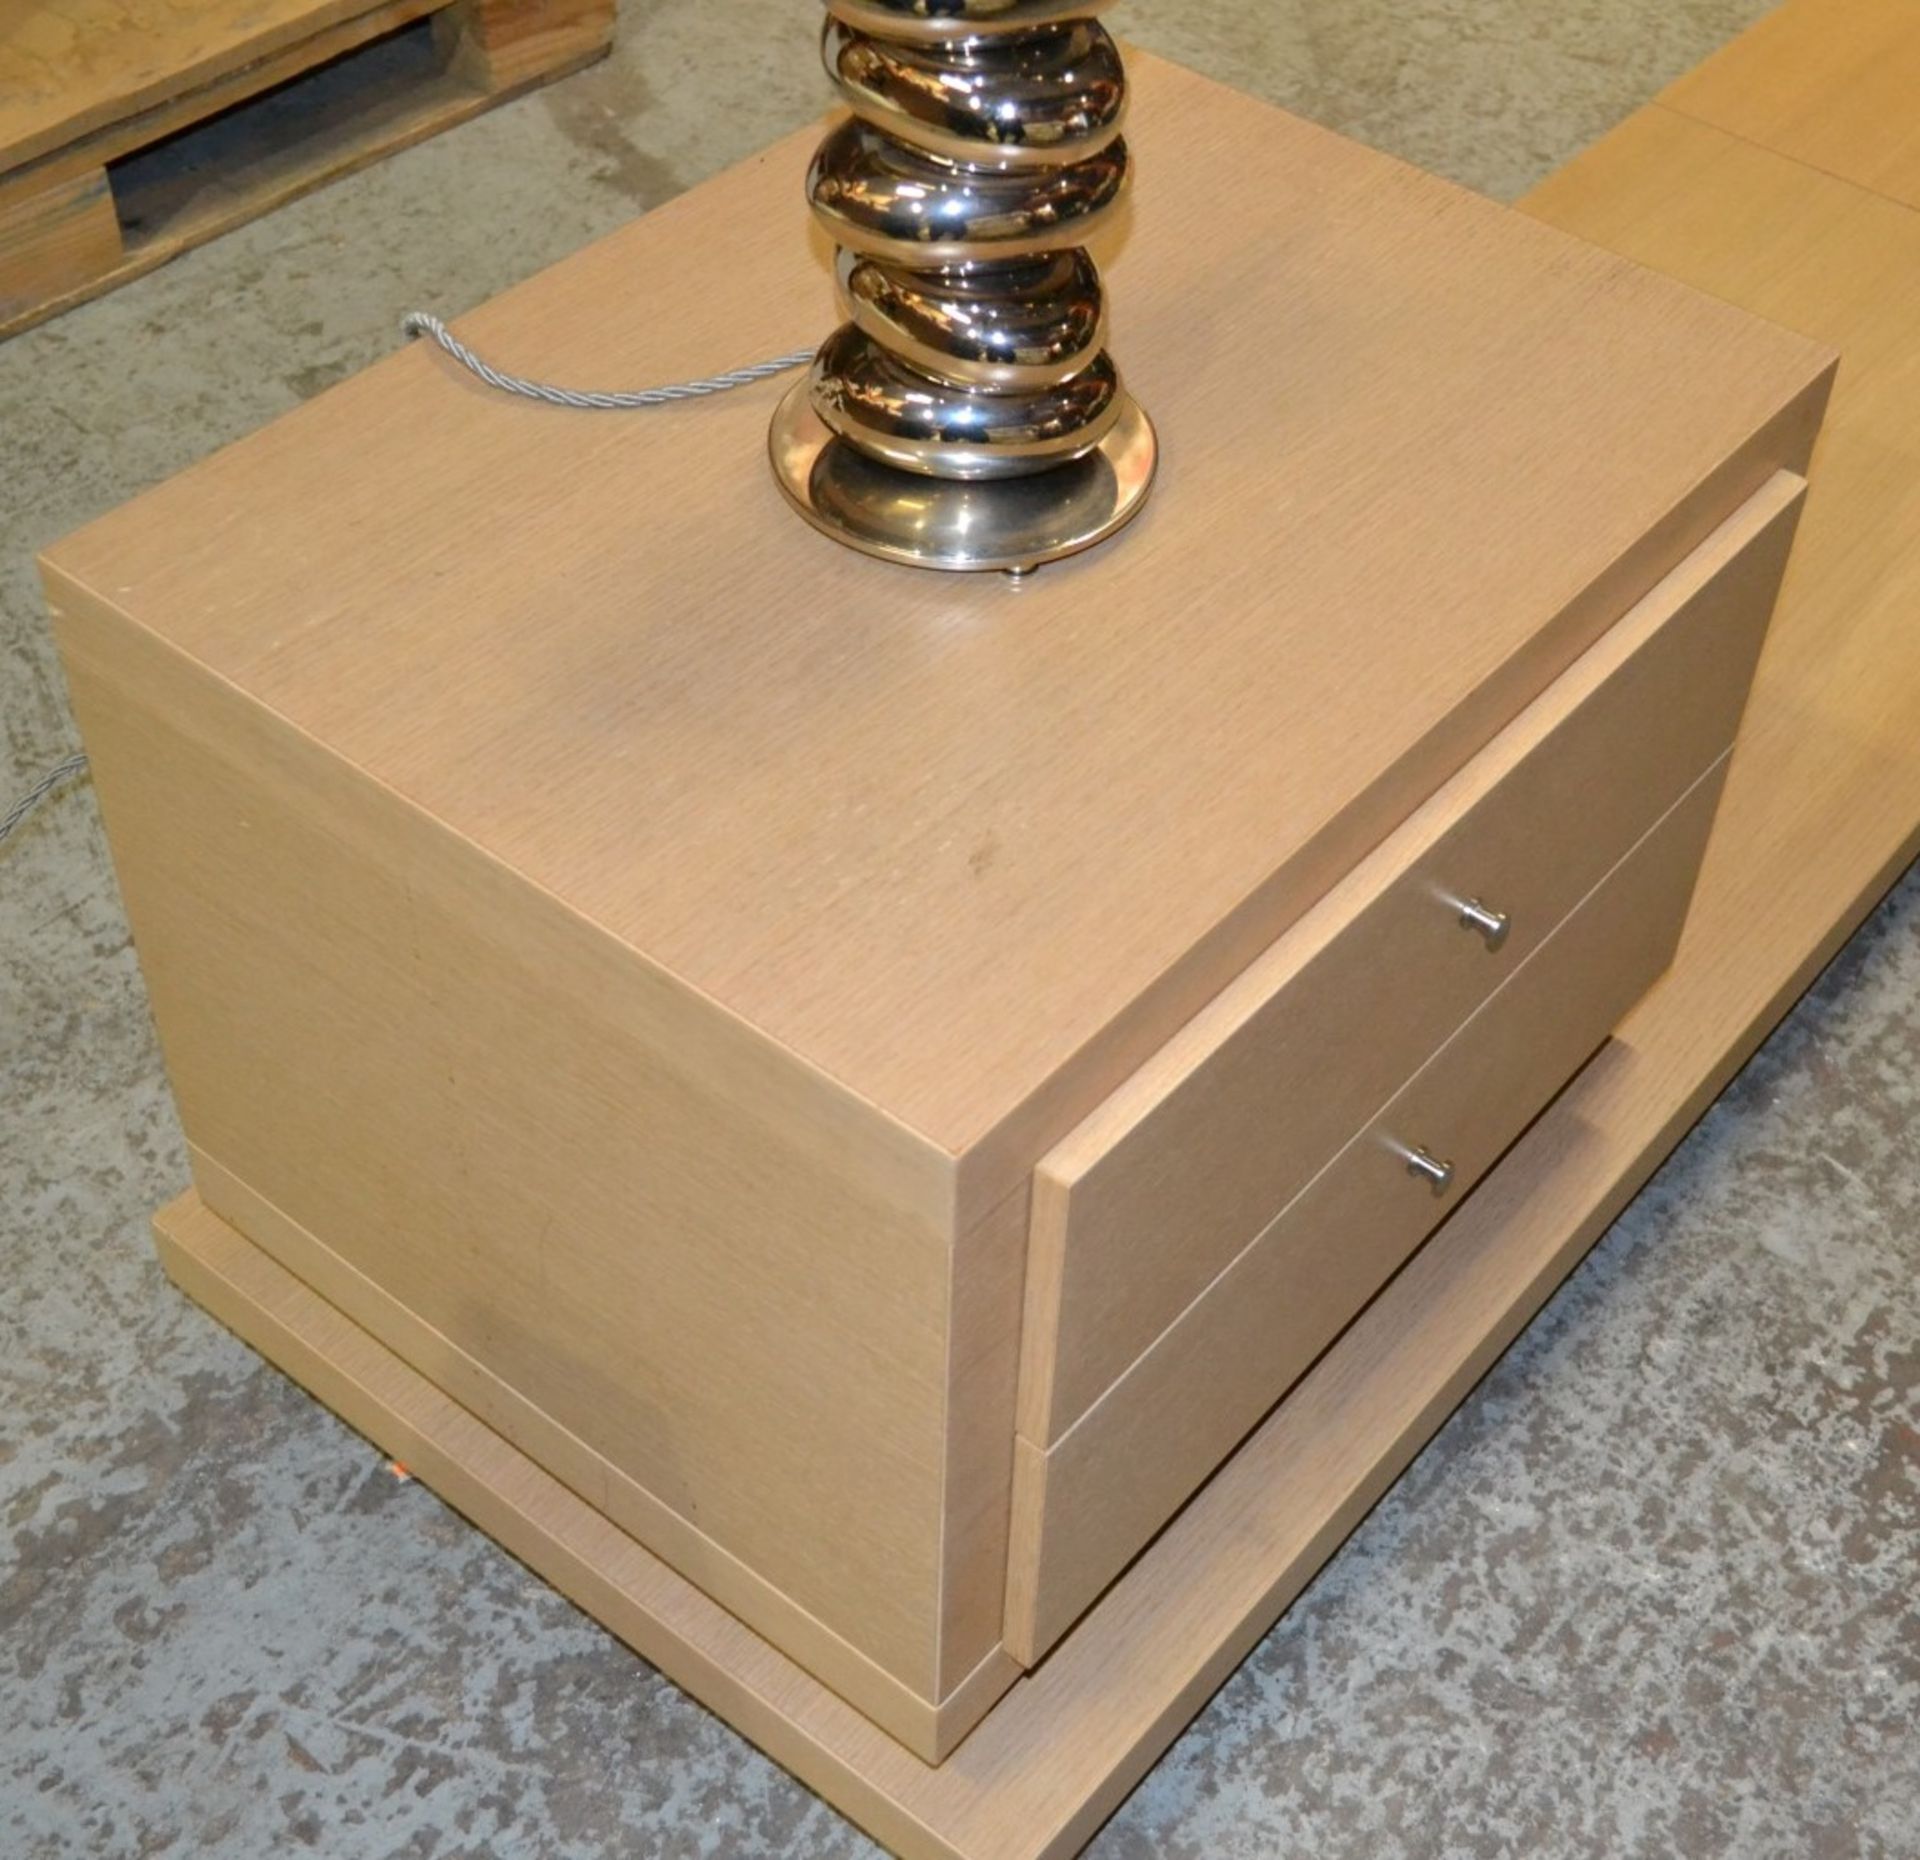 2 x Bedside Cabinets On Underbed Plinth With A Classic Oak Finish - 3 Metres Wide  - Used In Good - Image 2 of 8